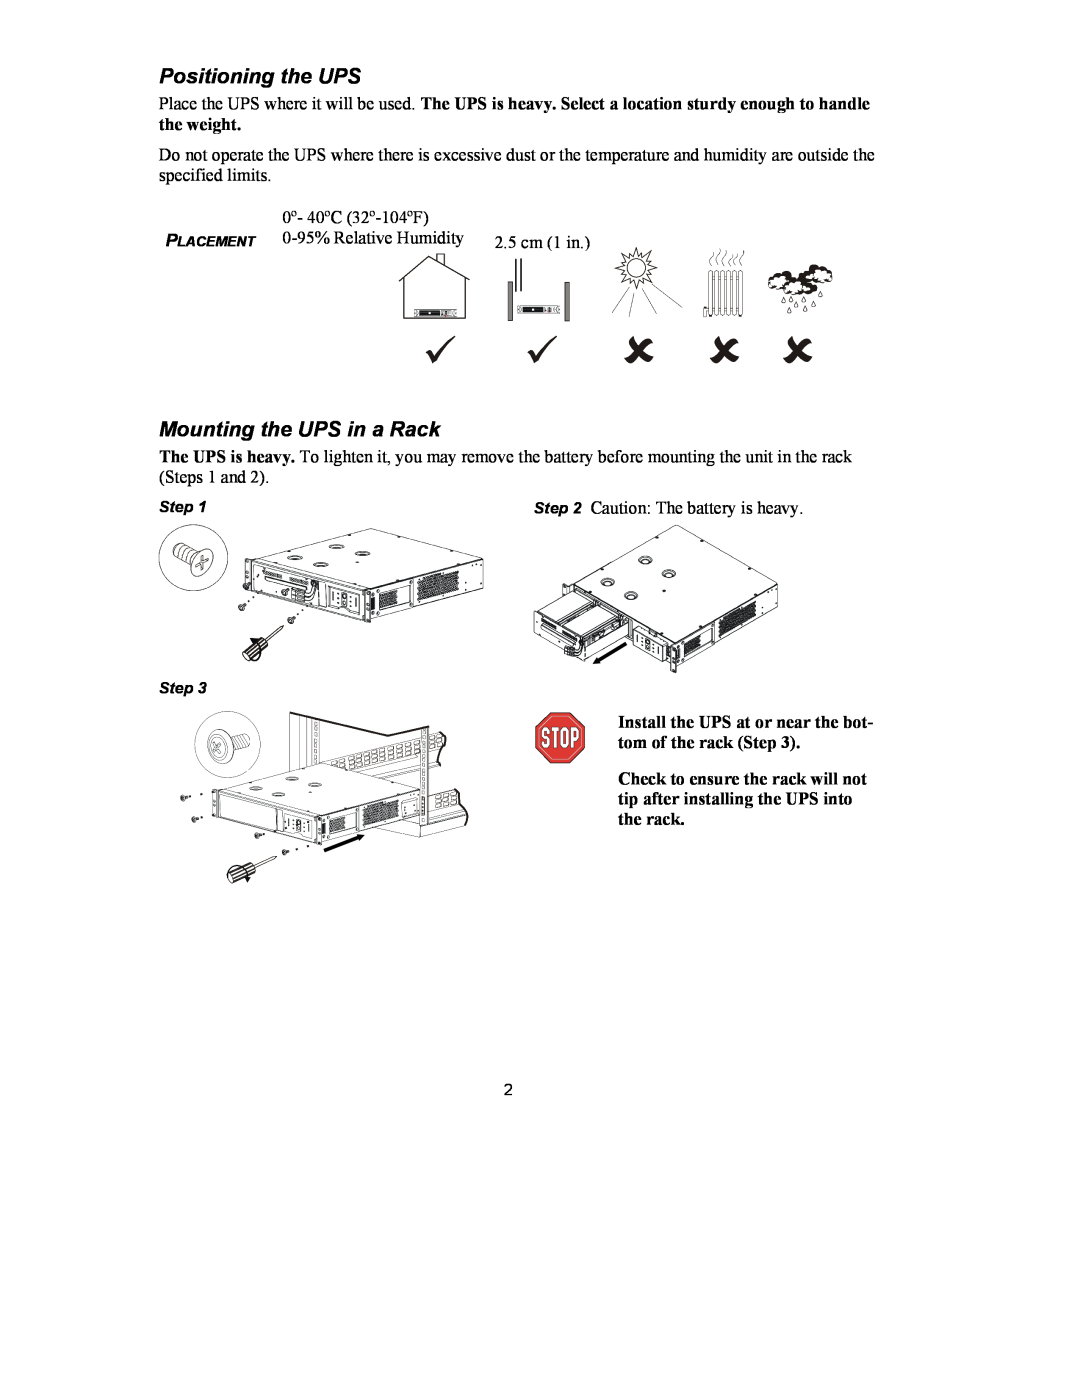 American Power Conversion 750 VA user manual Positioning the UPS, Mounting the UPS in a Rack, Caution The battery is heavy 